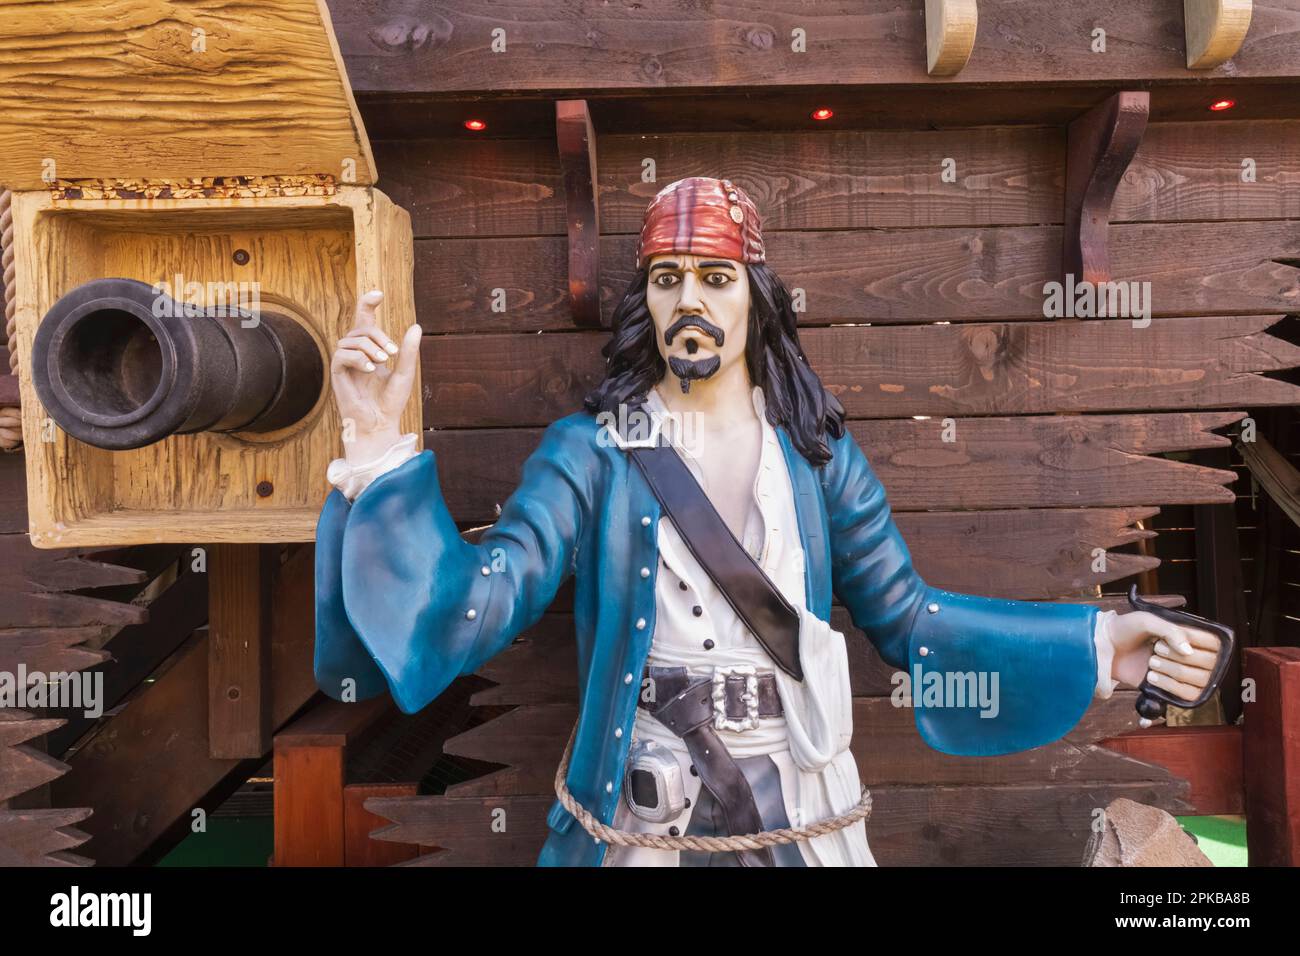 England, Dorset, Isle of Purbeck, Swanage, Amusement Park Johnny Depp Look a like Pirate Stock Photo